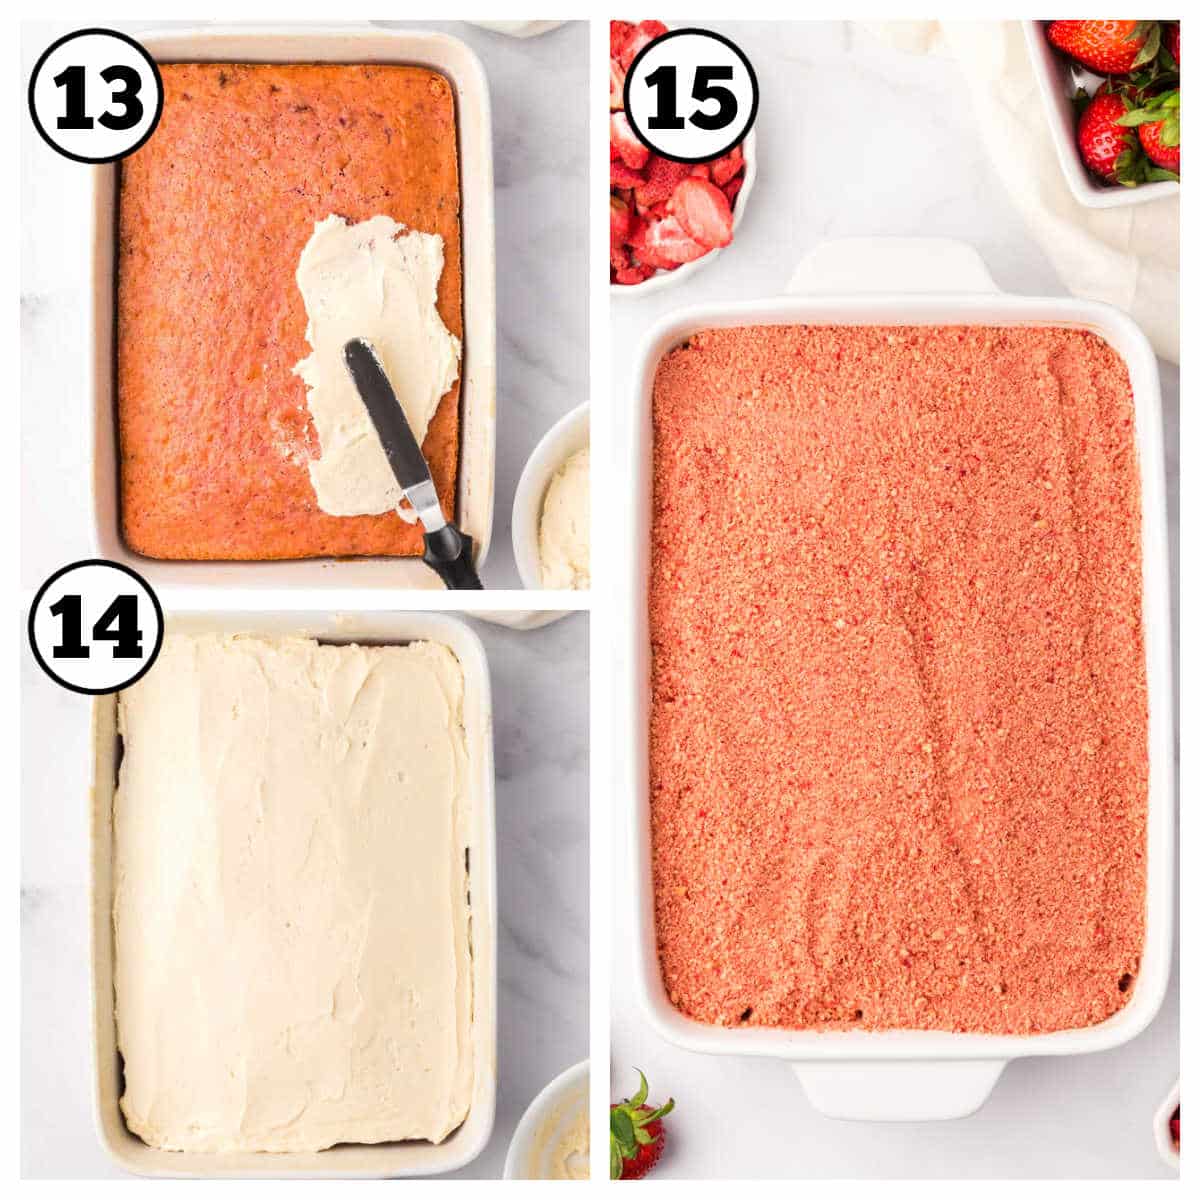 Steps 13-15 for how to make strawberry crunch cake.